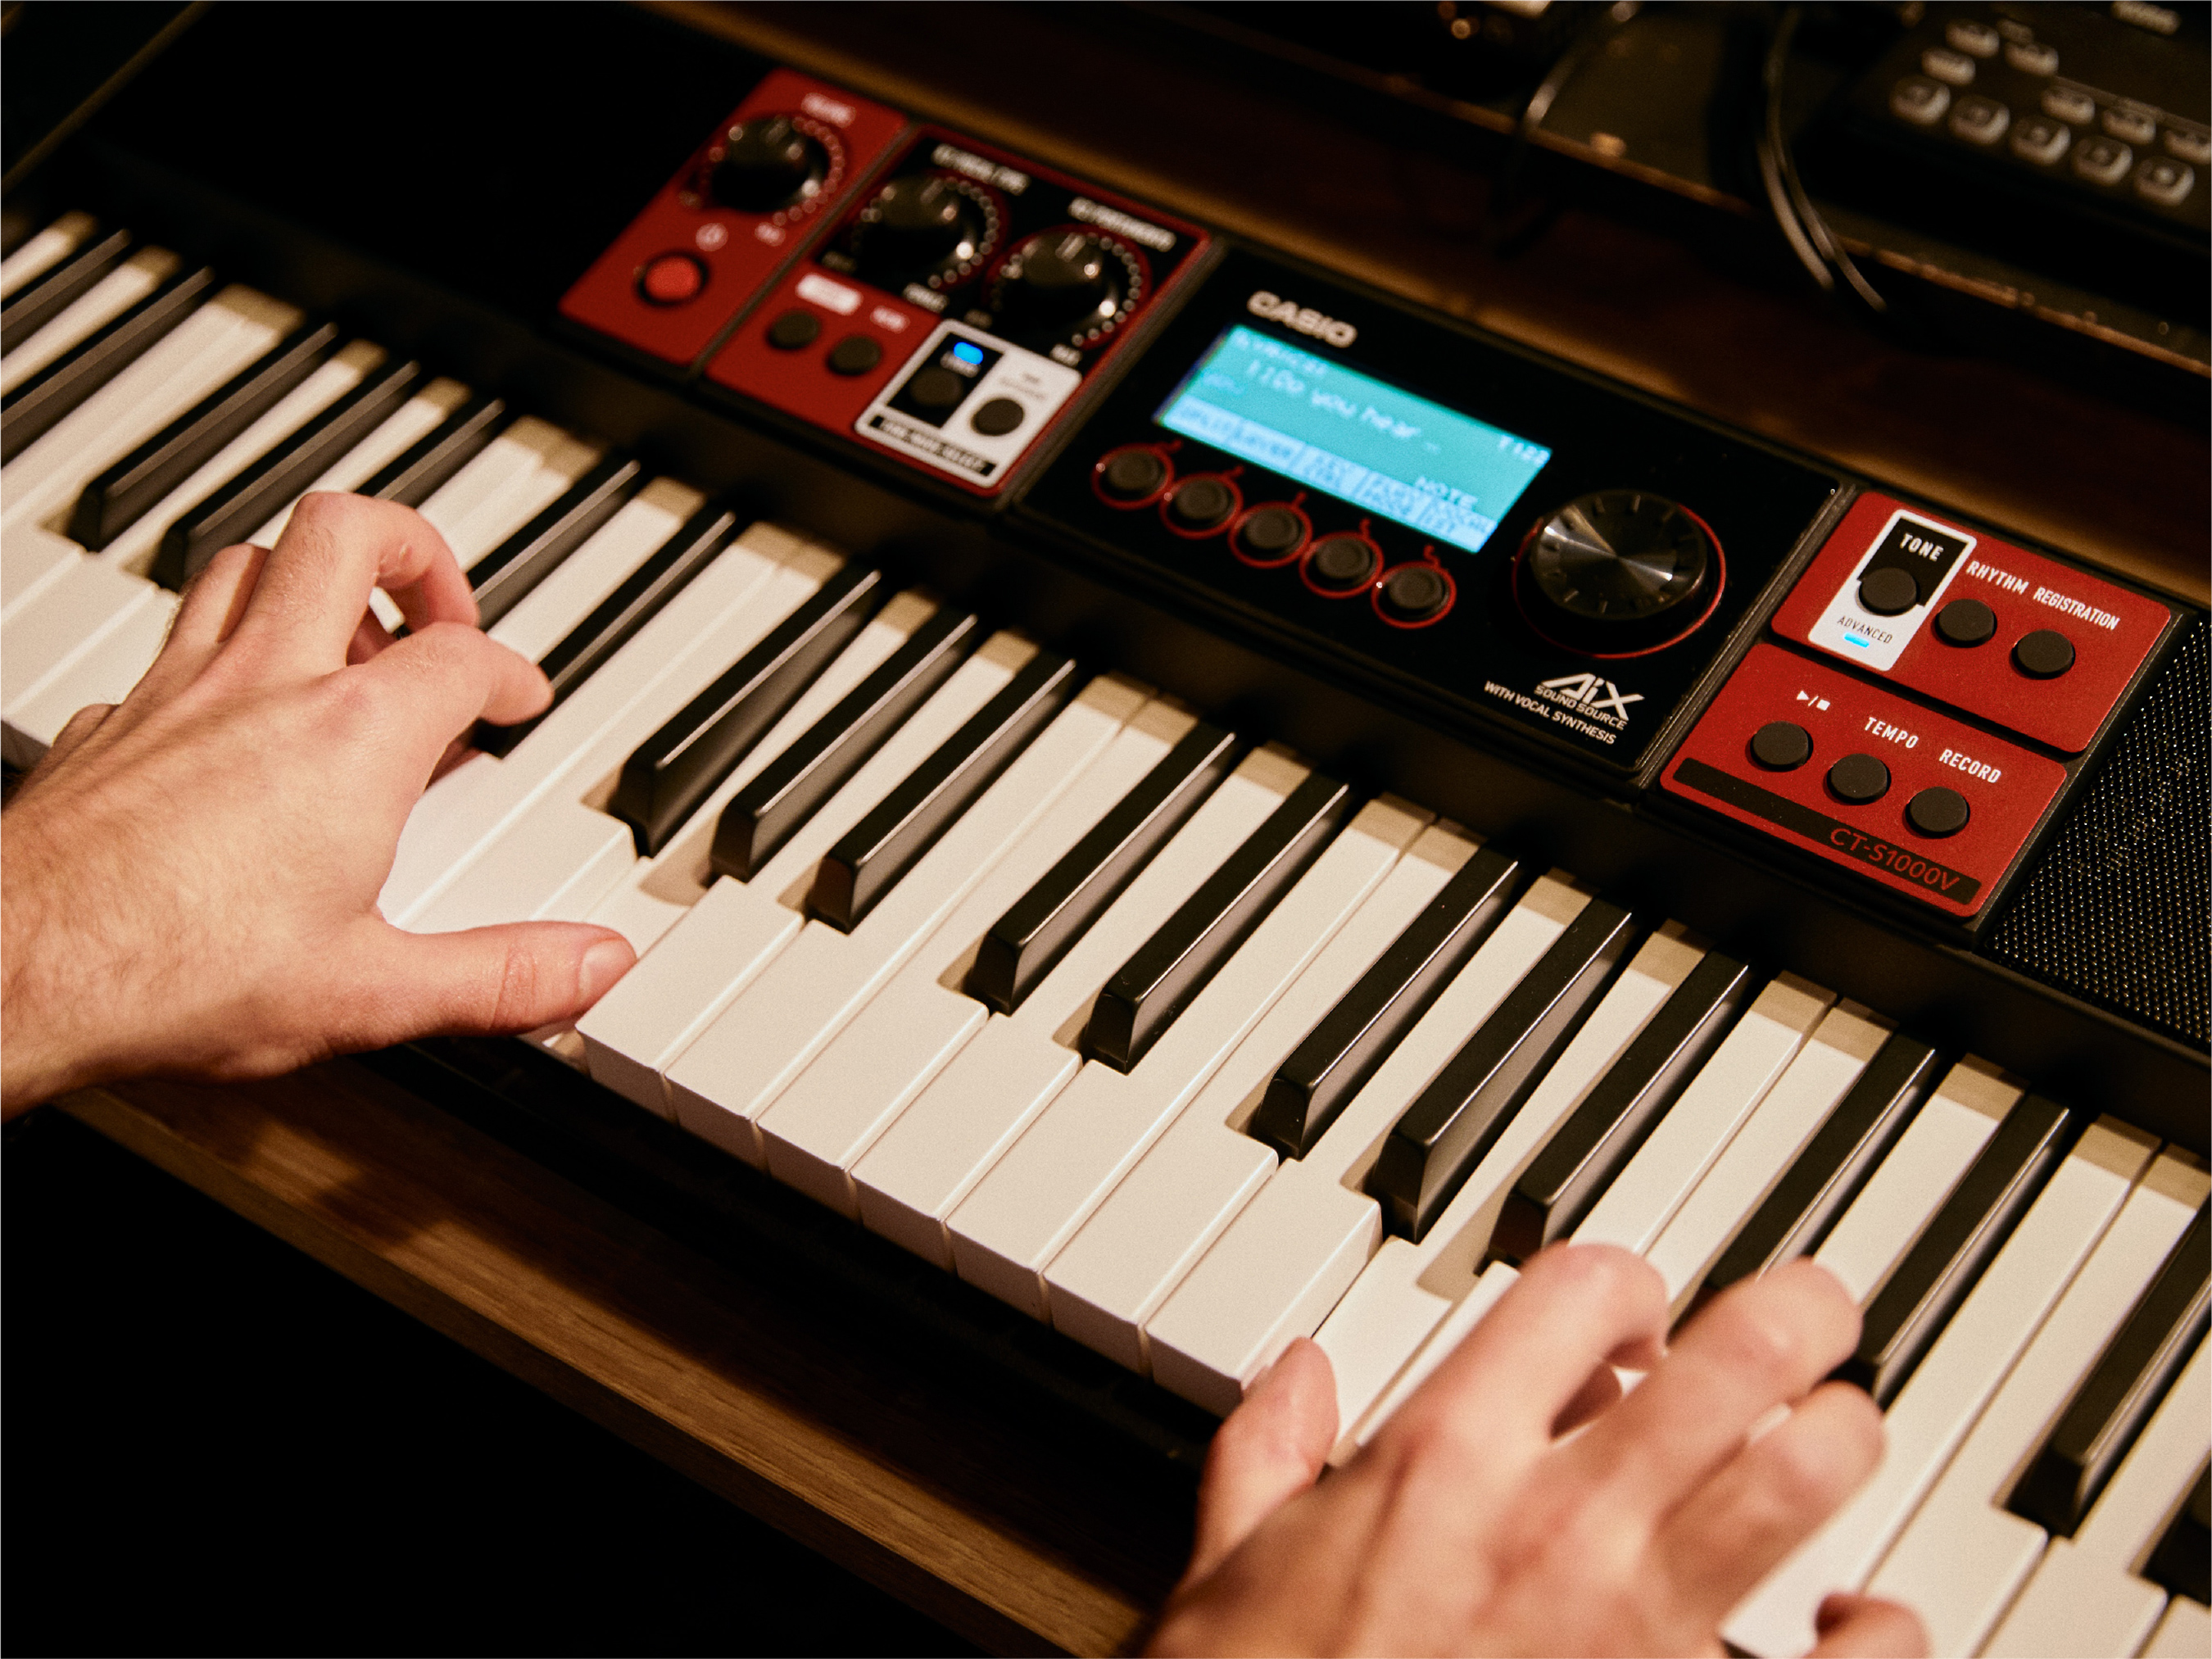 The Casiotone CT-S1000V is the first keyboard to be able to speak and sing with this degree of ease and musicality. Lyrics can be played as individual notes (one syllable per keypress) or complete phrases, and can be sequenced together to play entire songs.